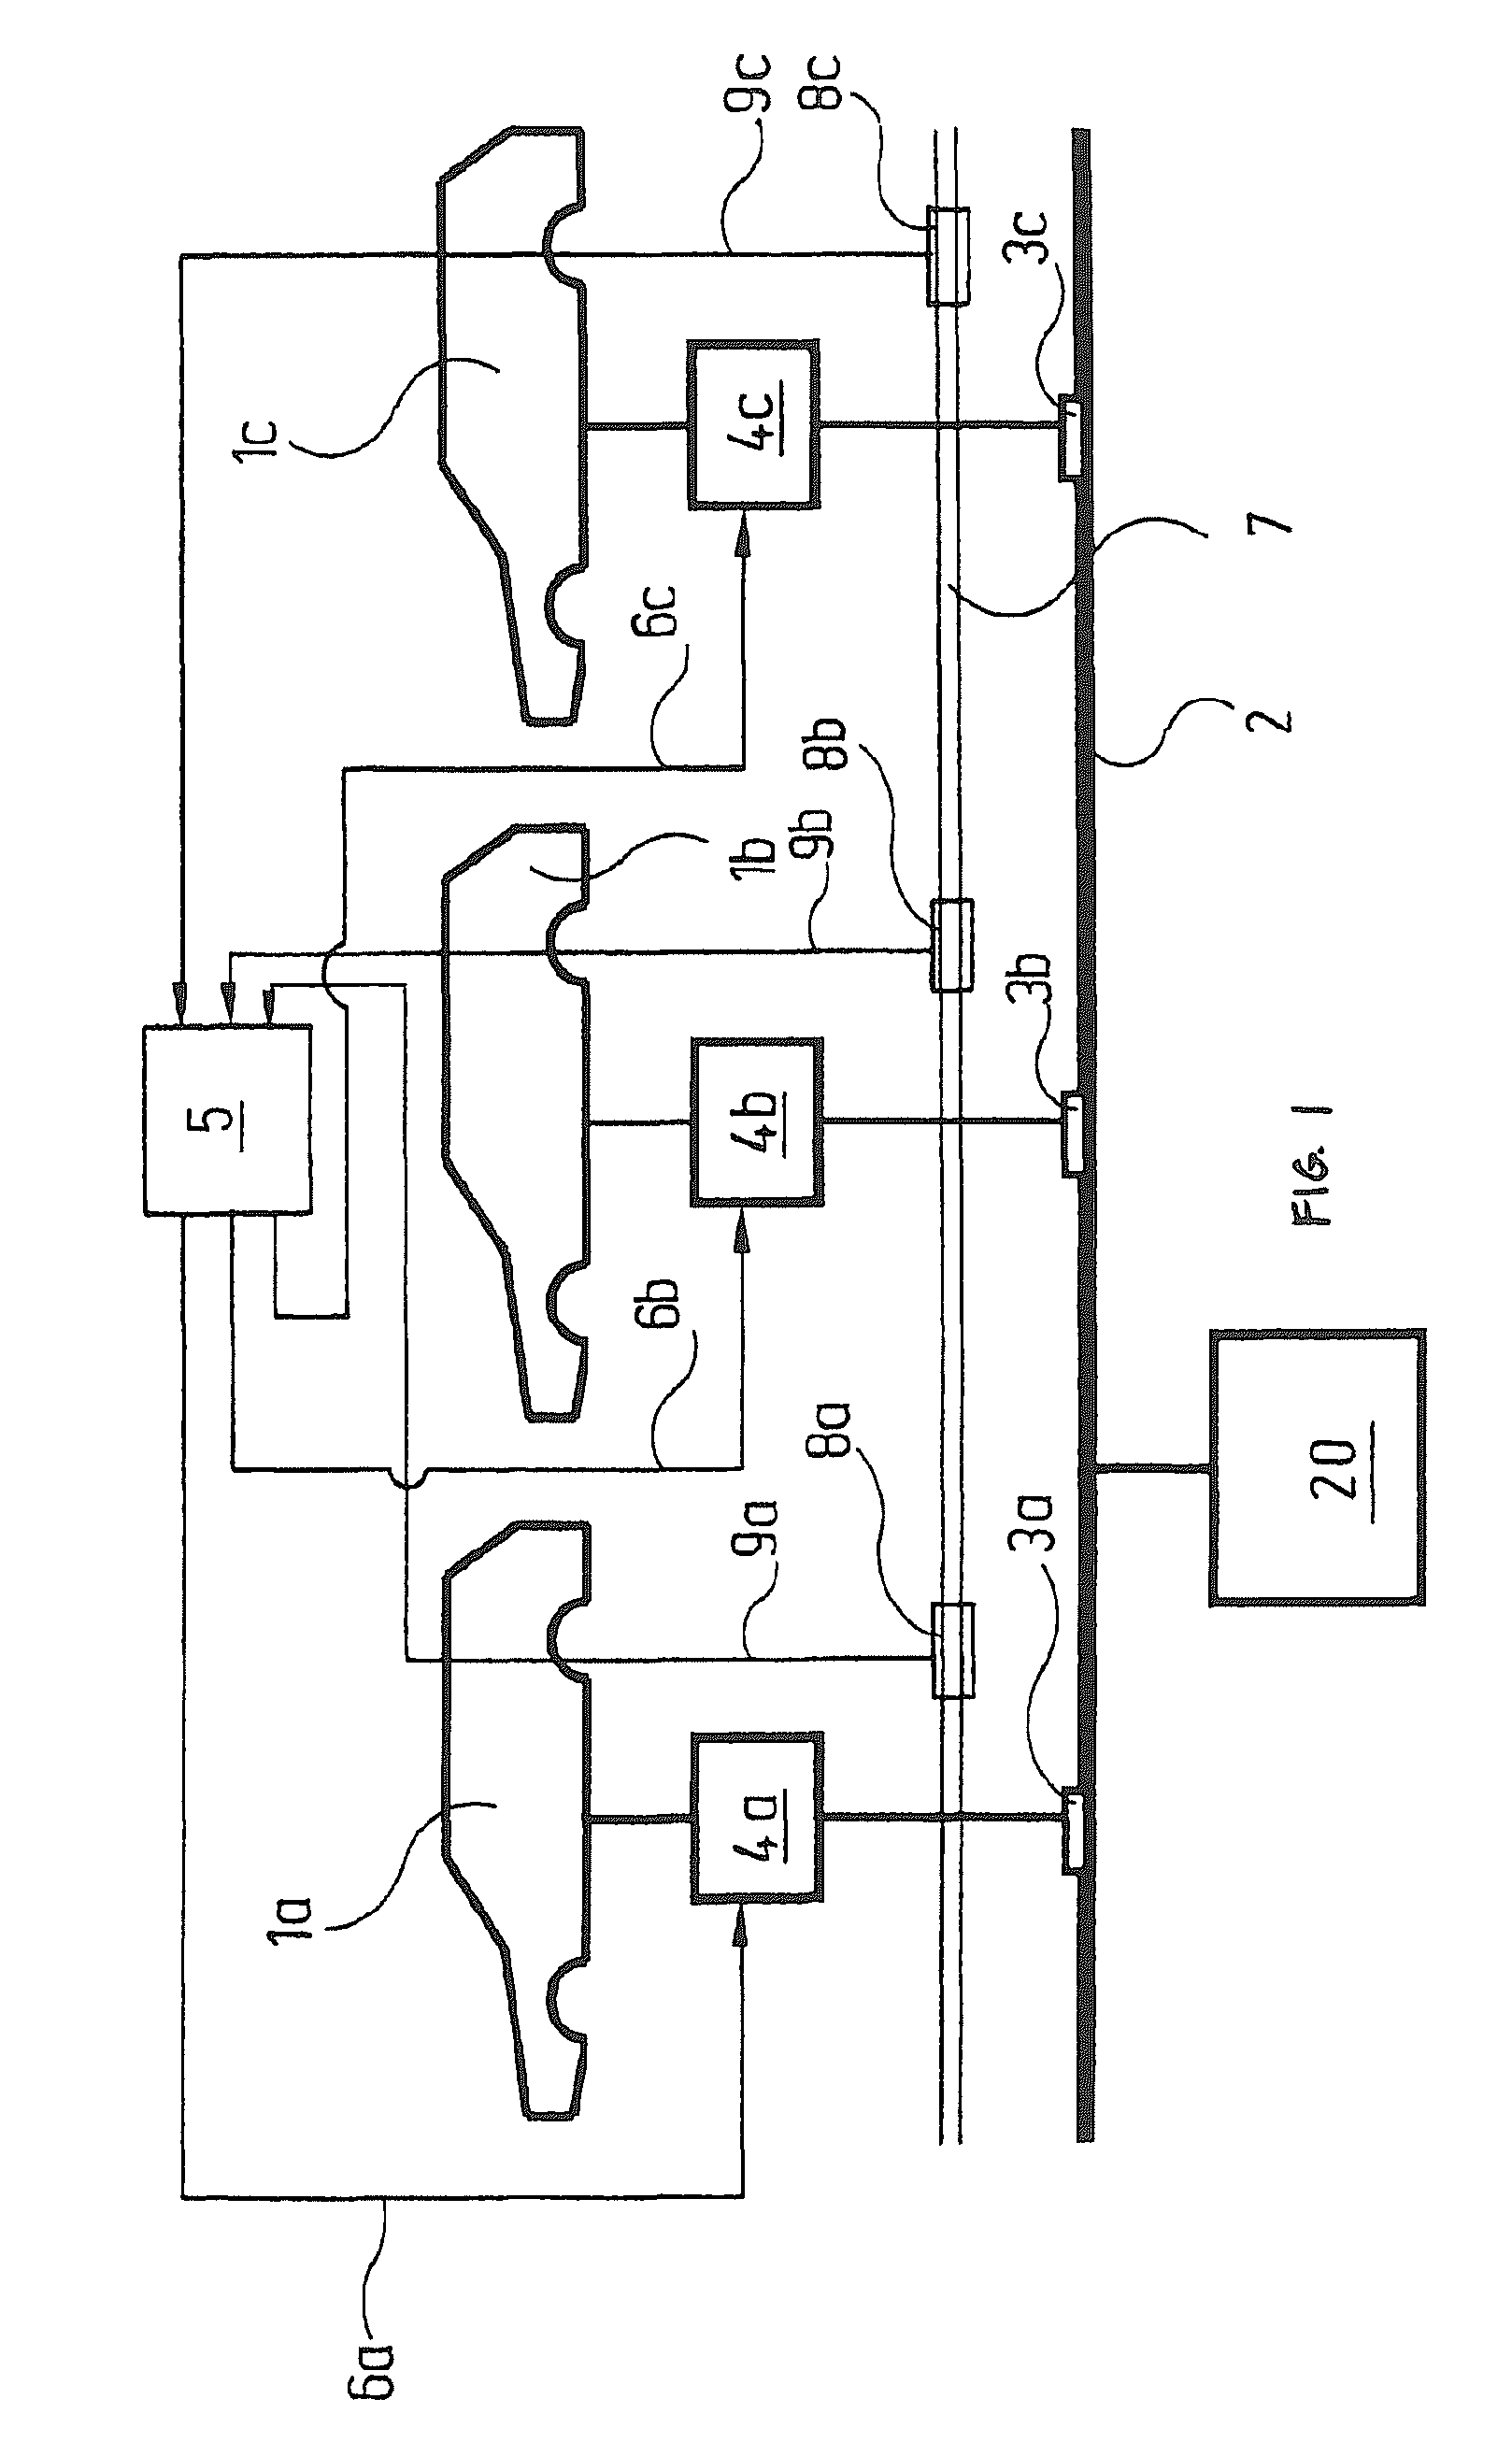 Electrodipping device